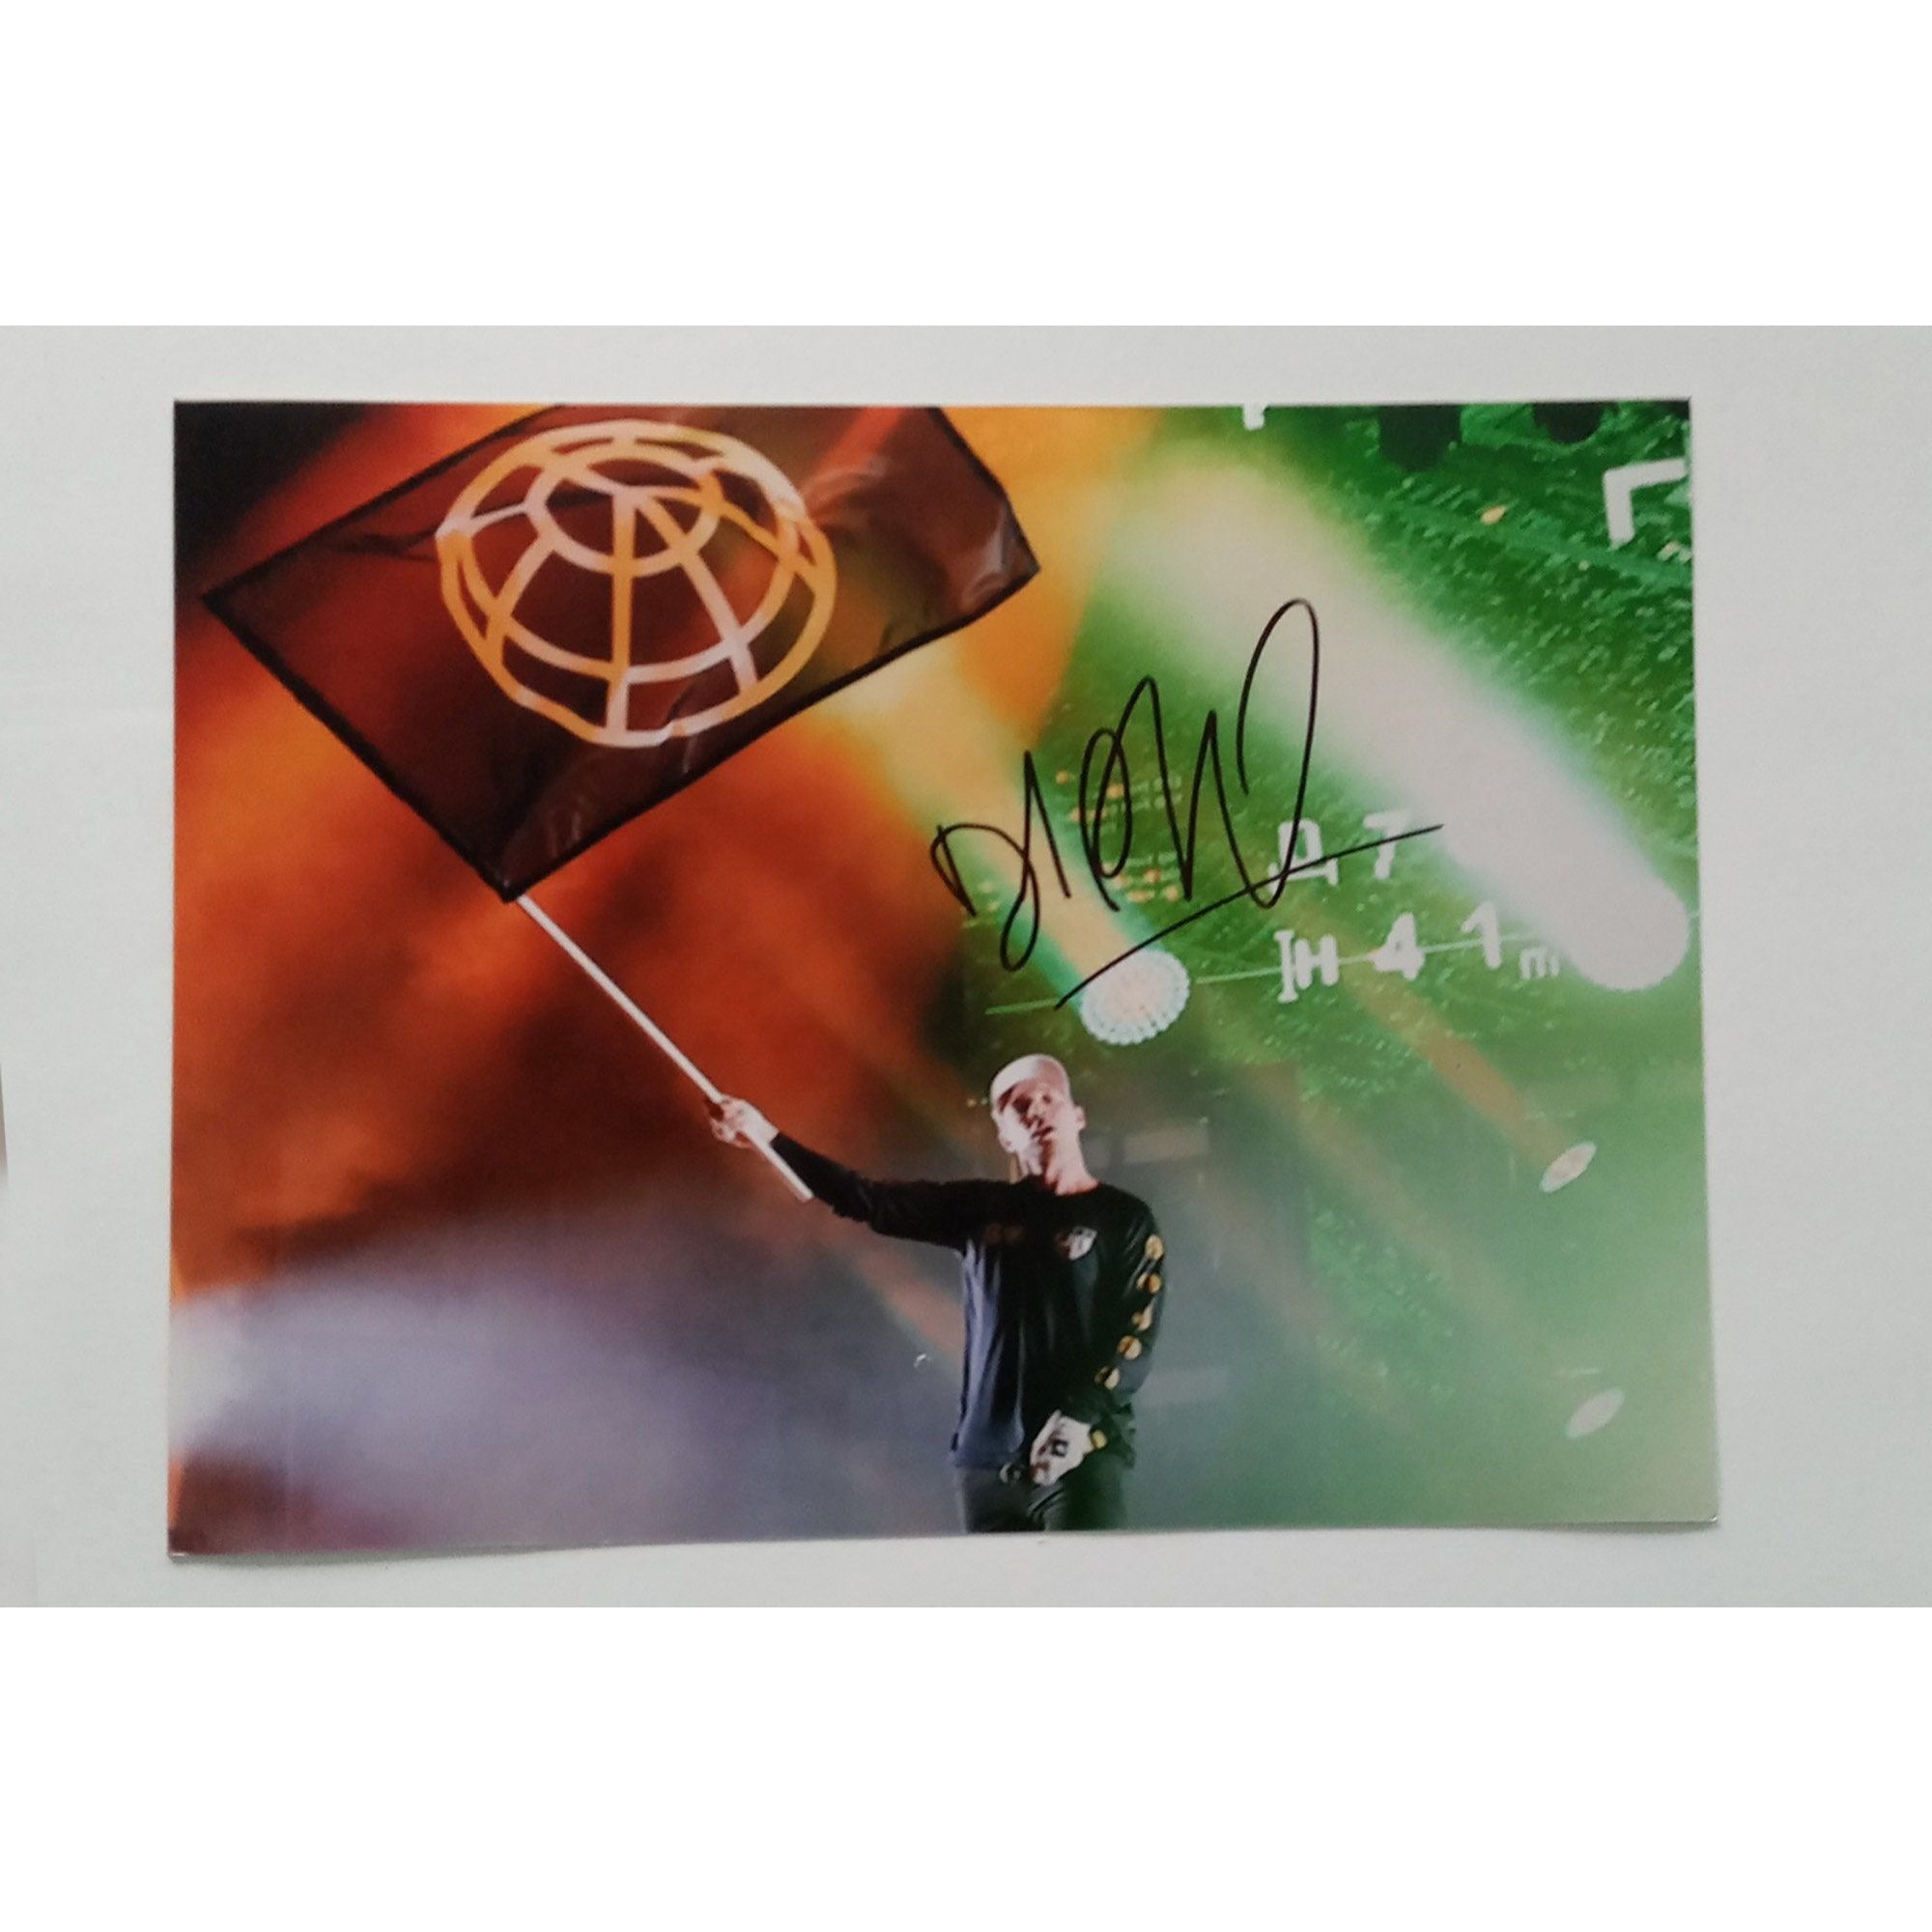 Diplo Thomas Wesley Pentz 8 by 10 signed photo with proof